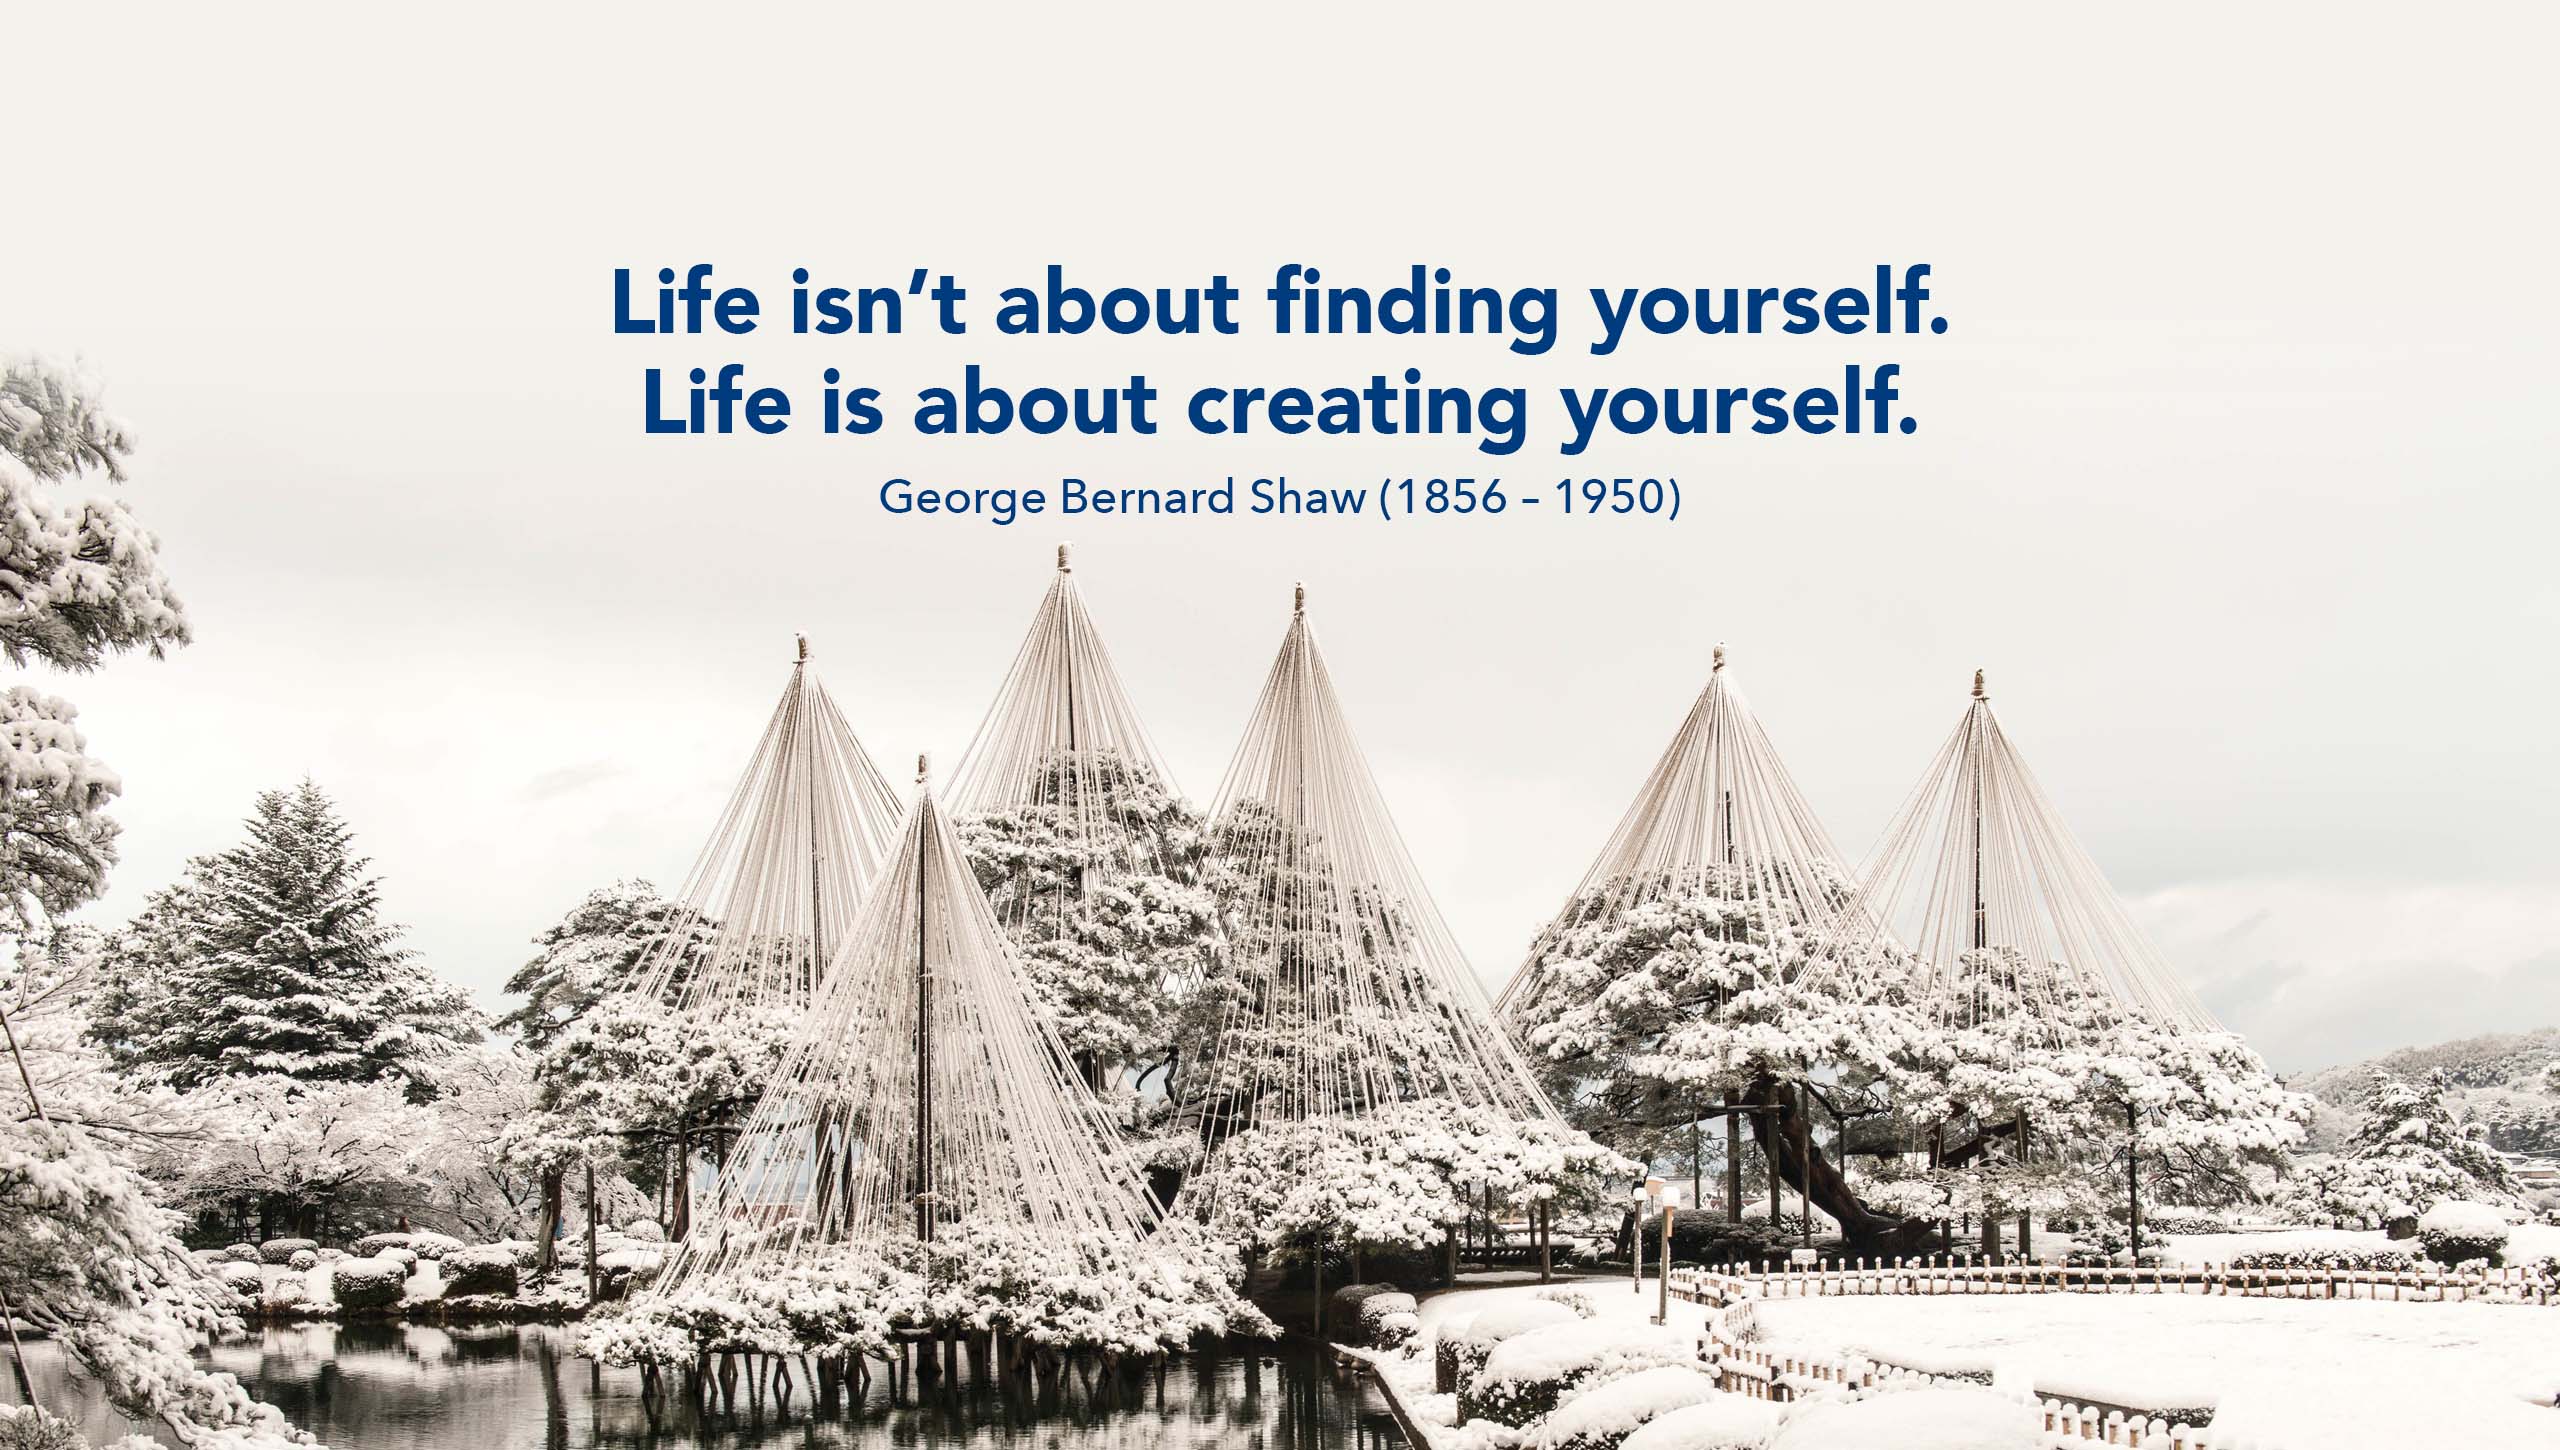 Life isn't about finding yourself. Life is about creating yourself. George Bernard Shaw (1856-1950)